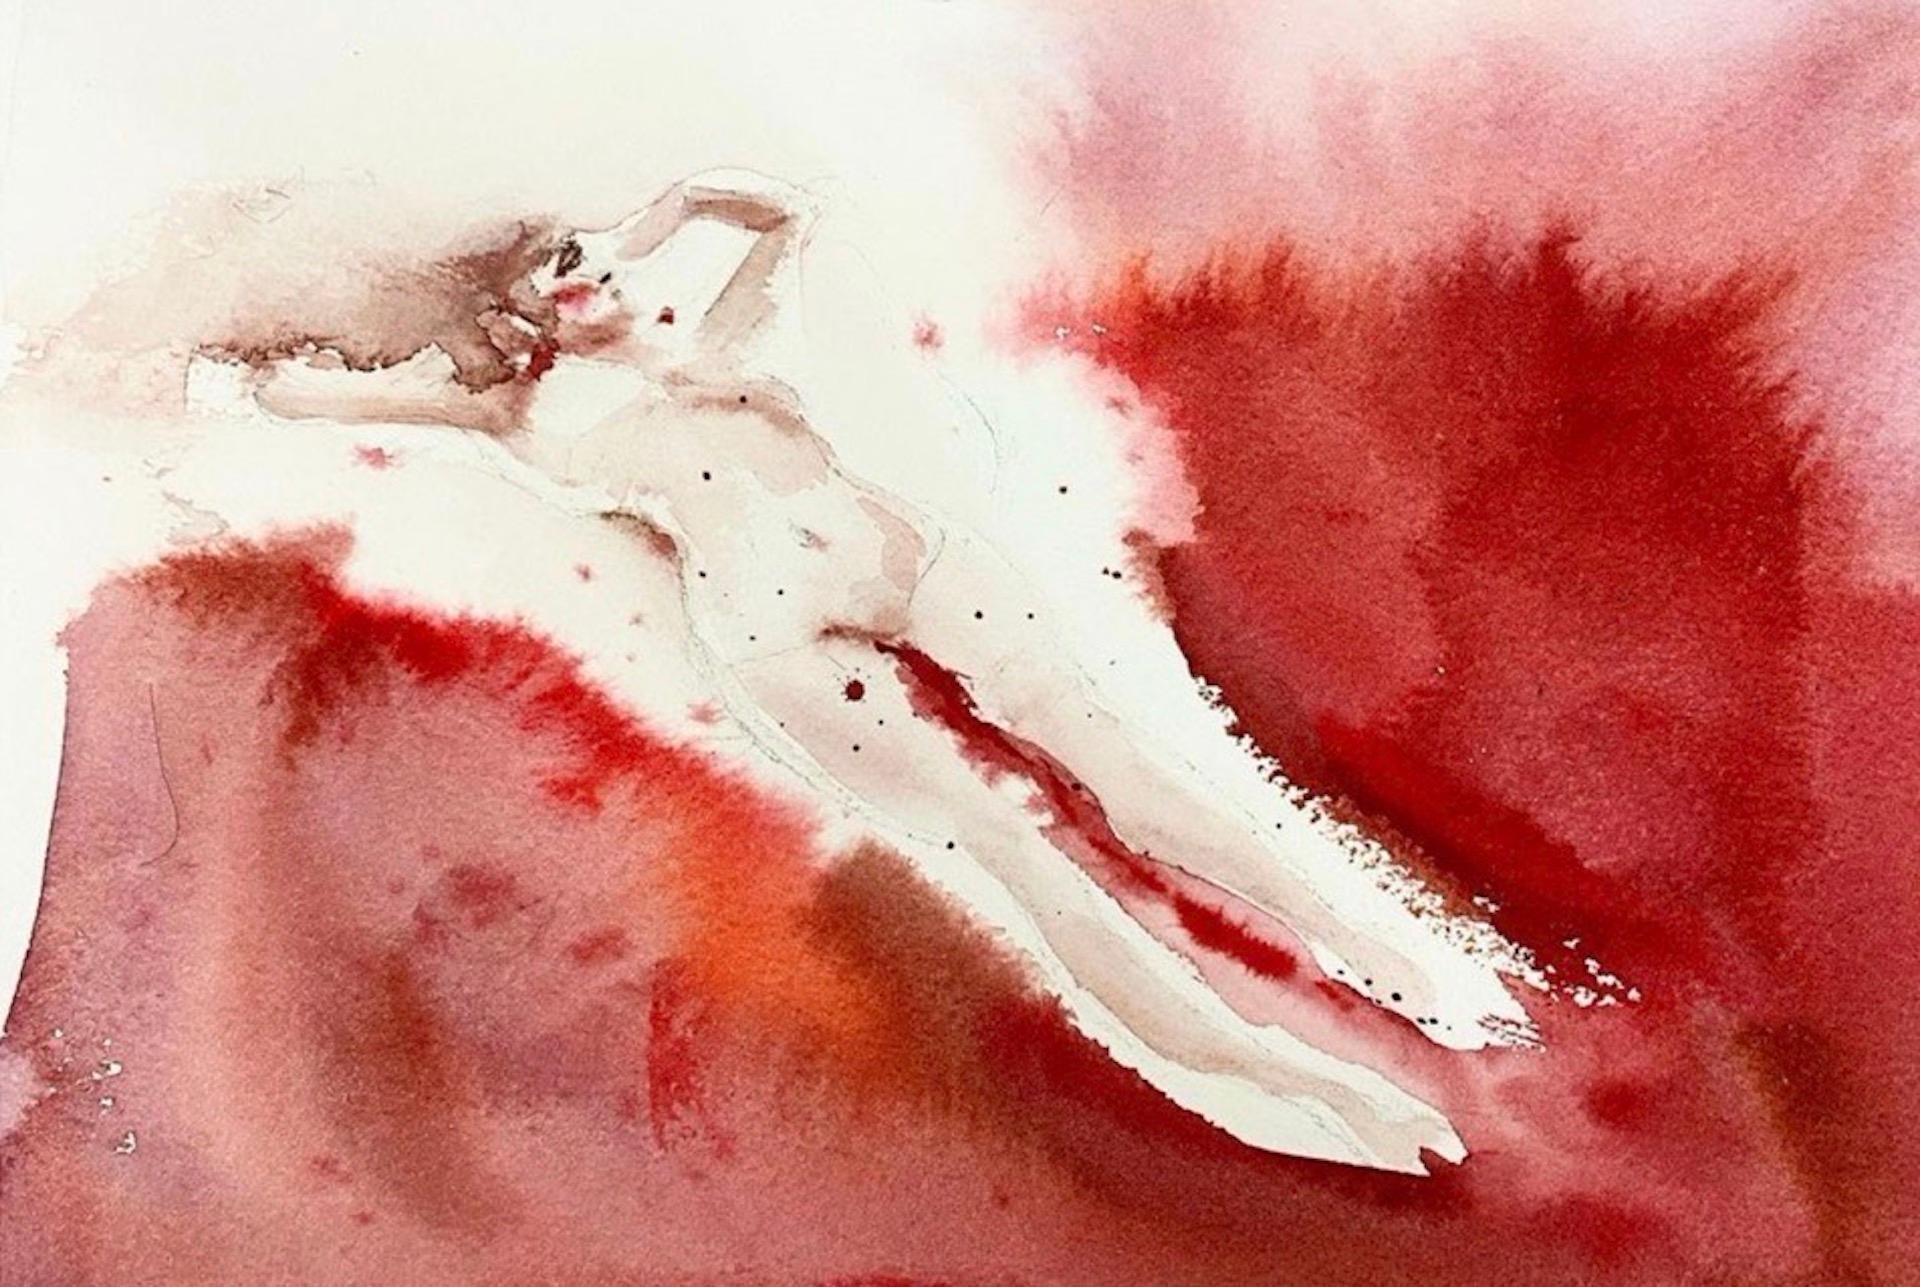 Russian Contemporary Art by Anna Bukhareva - Love for Blood